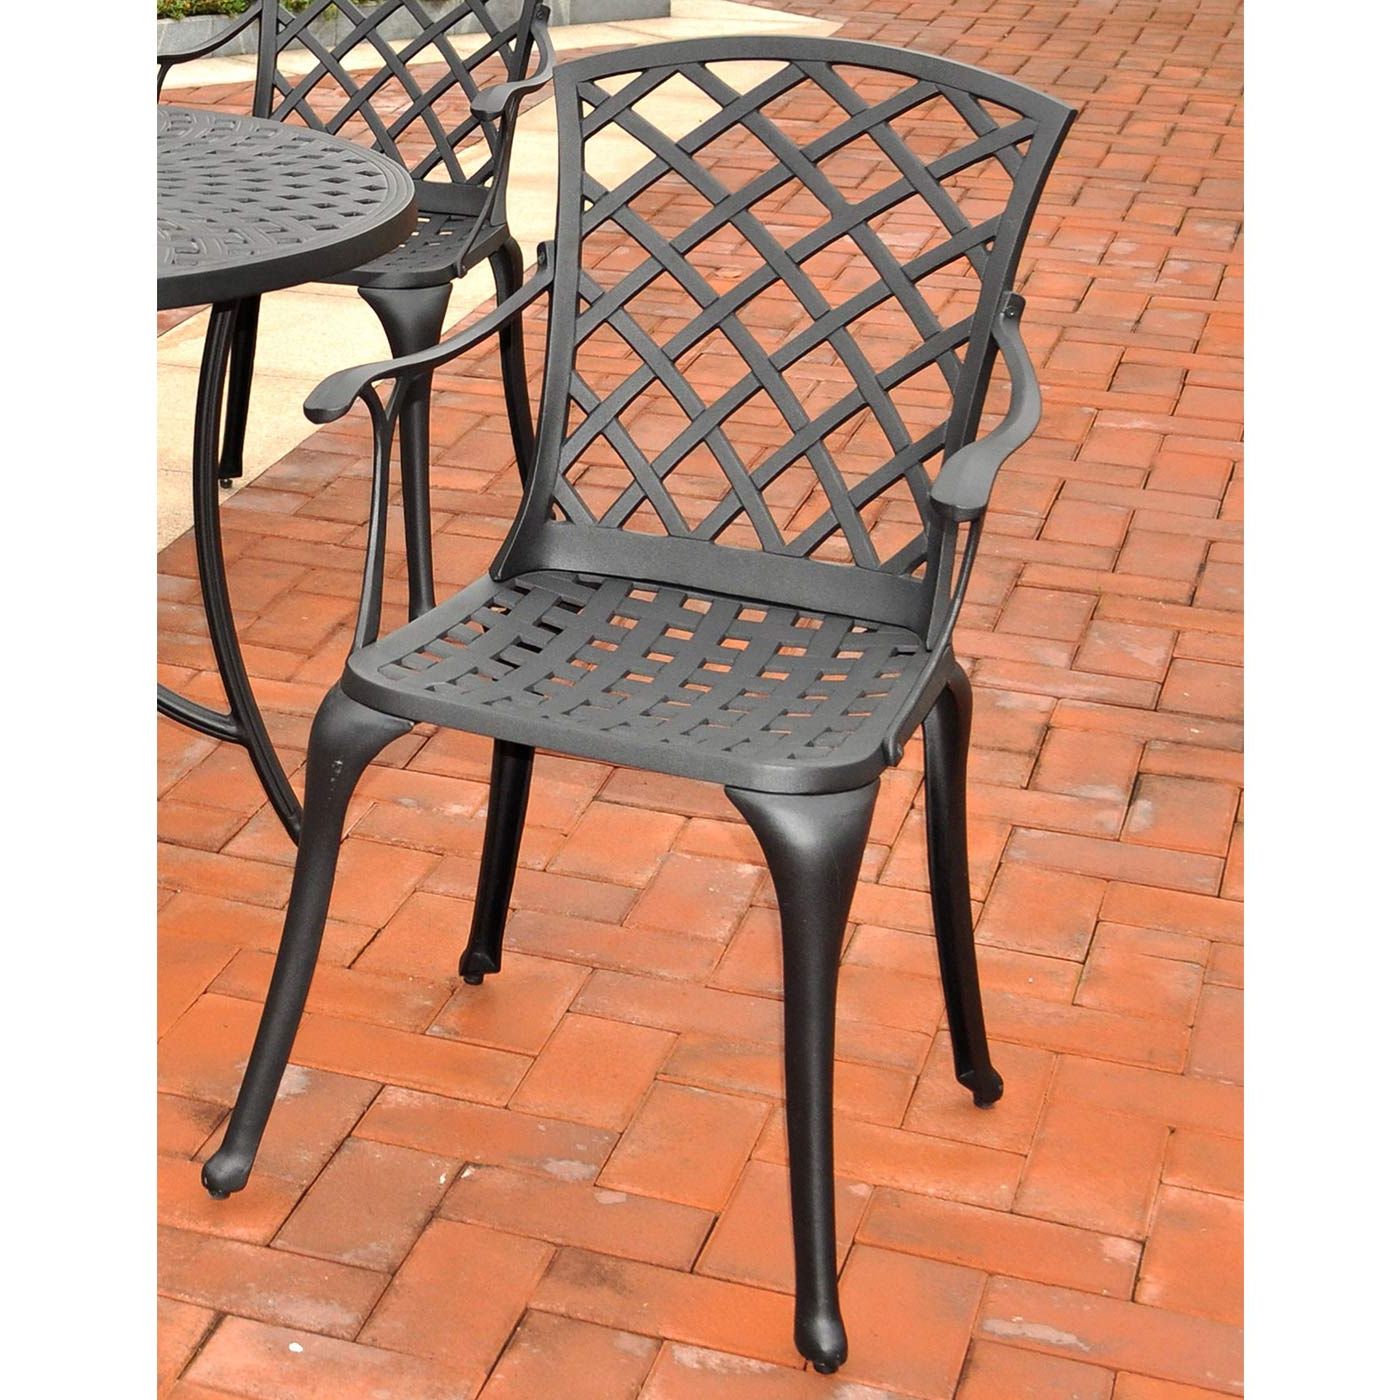 Crosley Sedona Set Of 2 Cast Aluminum High Back Arm Chairs In Charcoal Pertaining To Well Known Charcoal Fabric Patio Chair And Side Table (View 9 of 15)